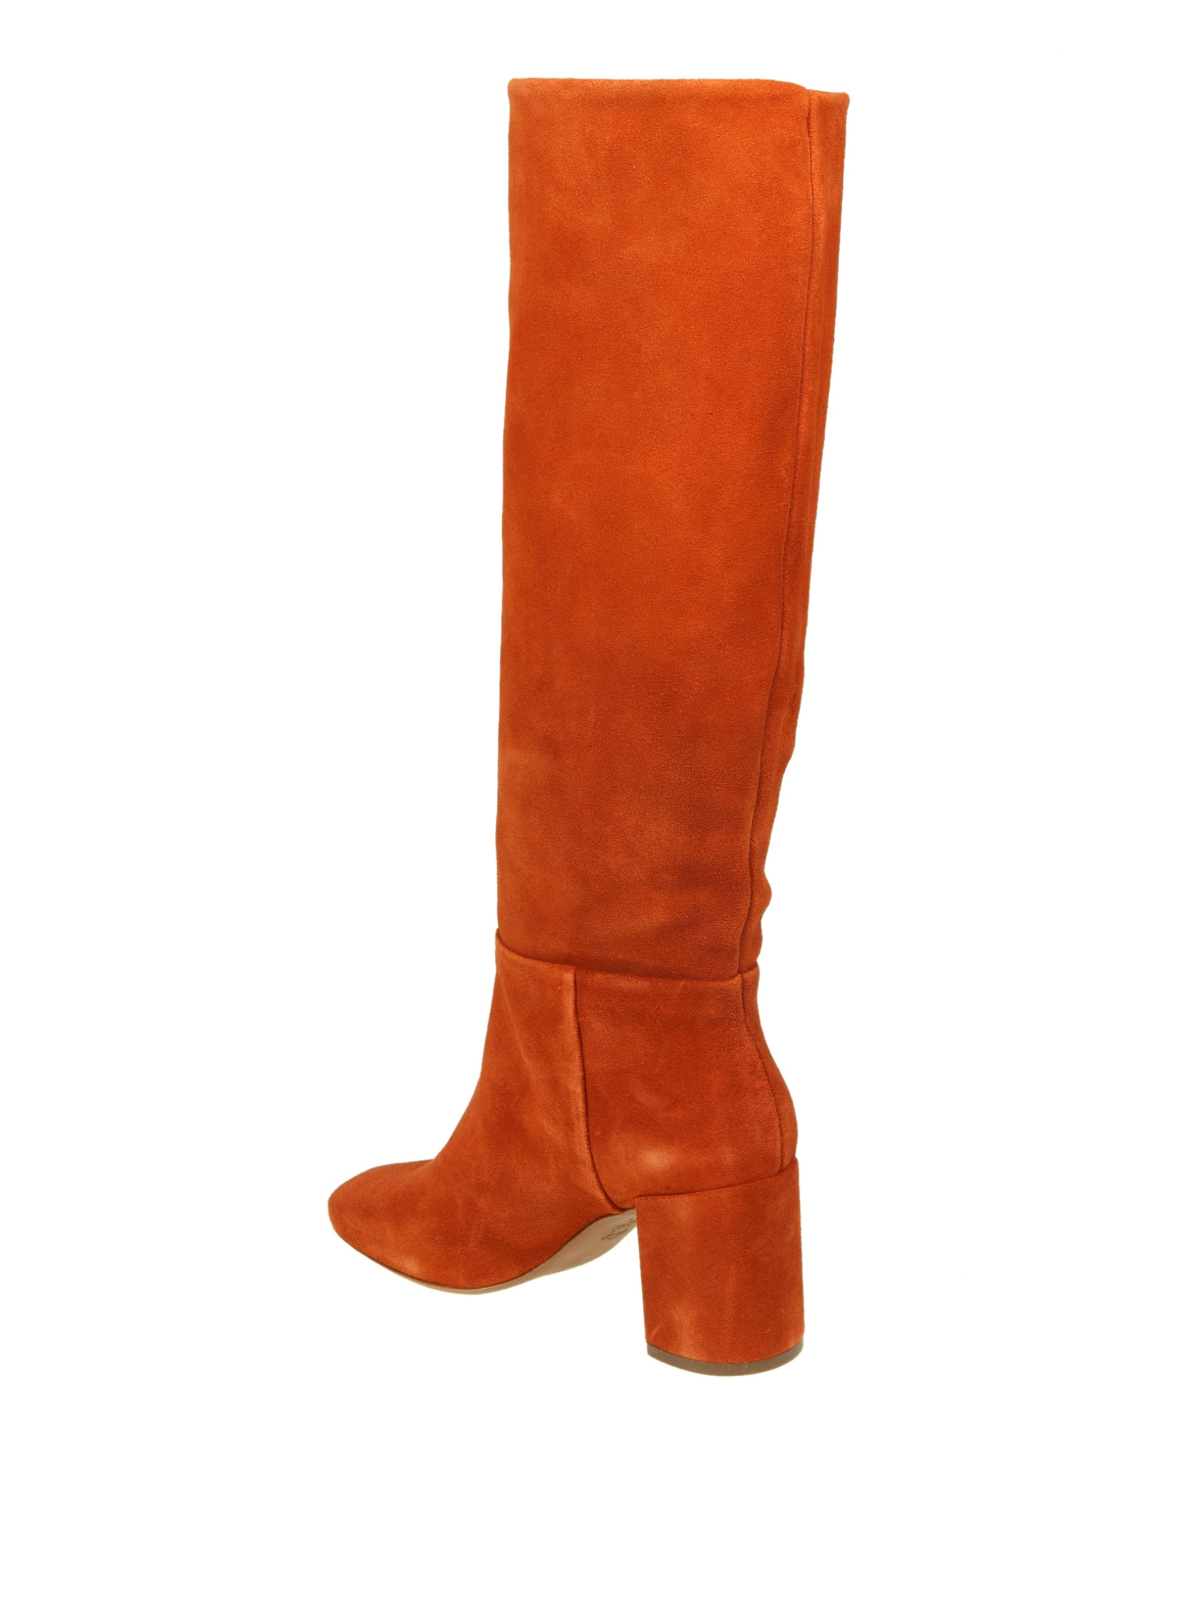 Boots Tory Burch - Brooke Slouchy suede boots - 49136217 